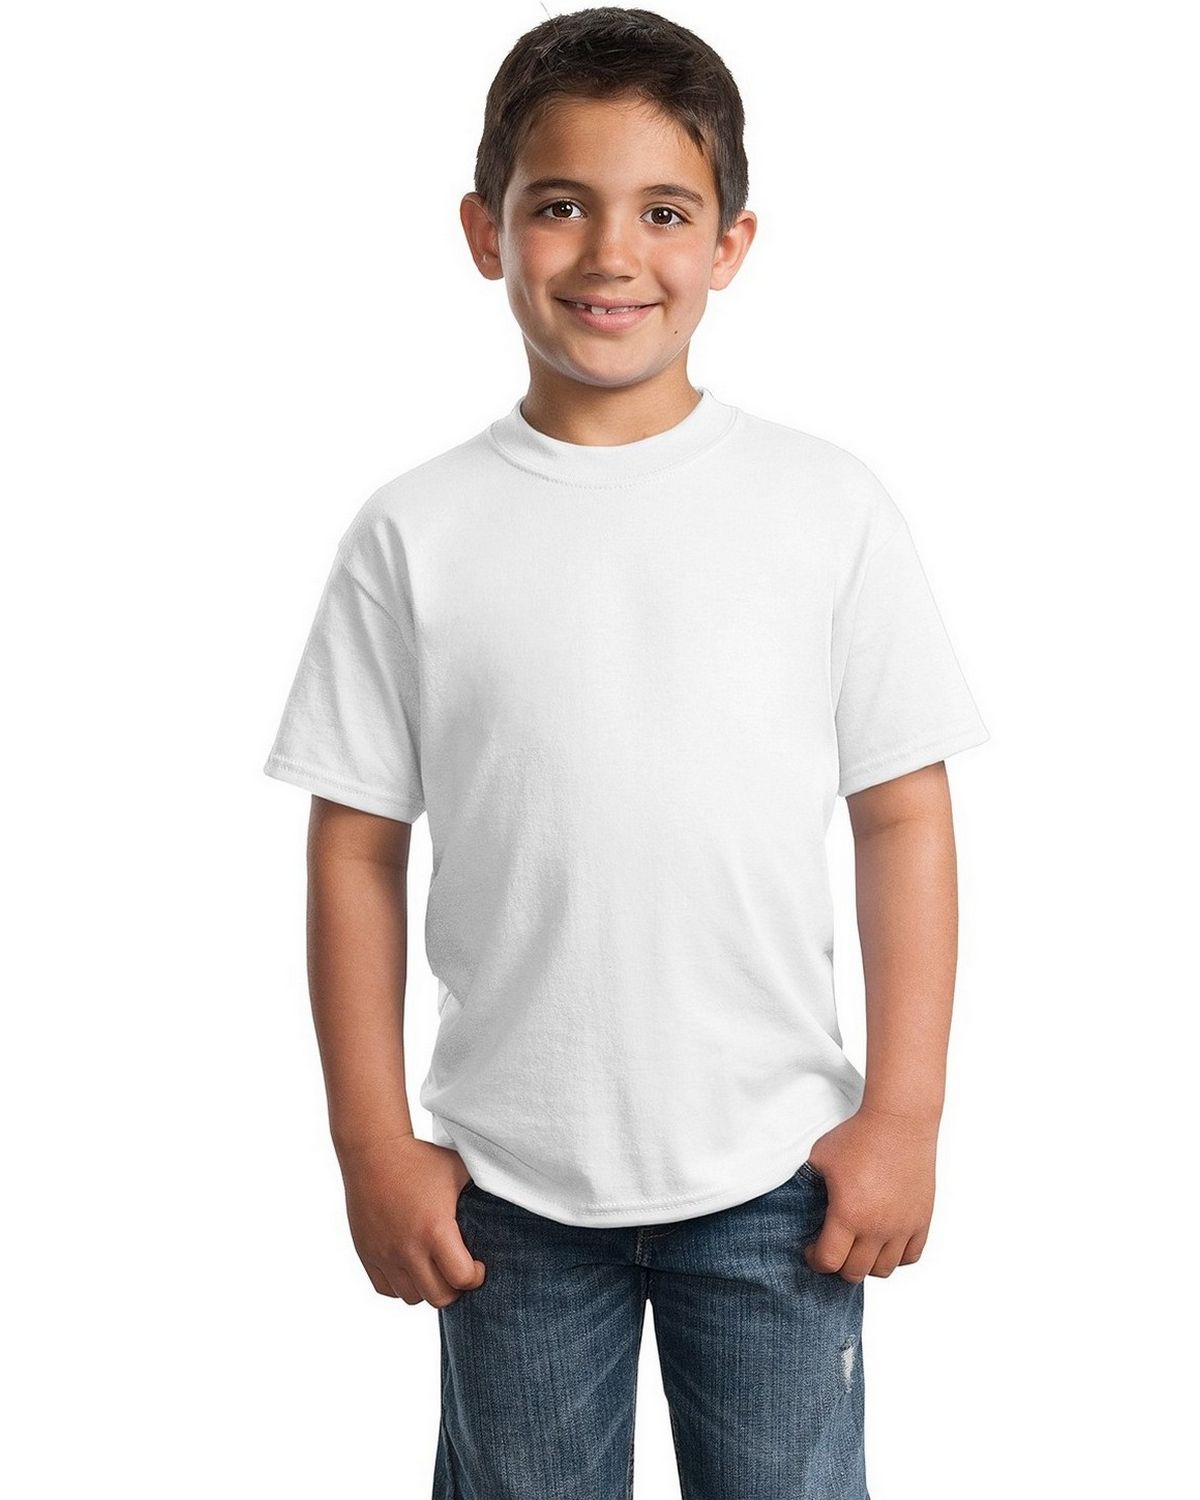 Size Chart for Port & Company PC55Y Youth 50/50 Cotton/Poly T-Shirt